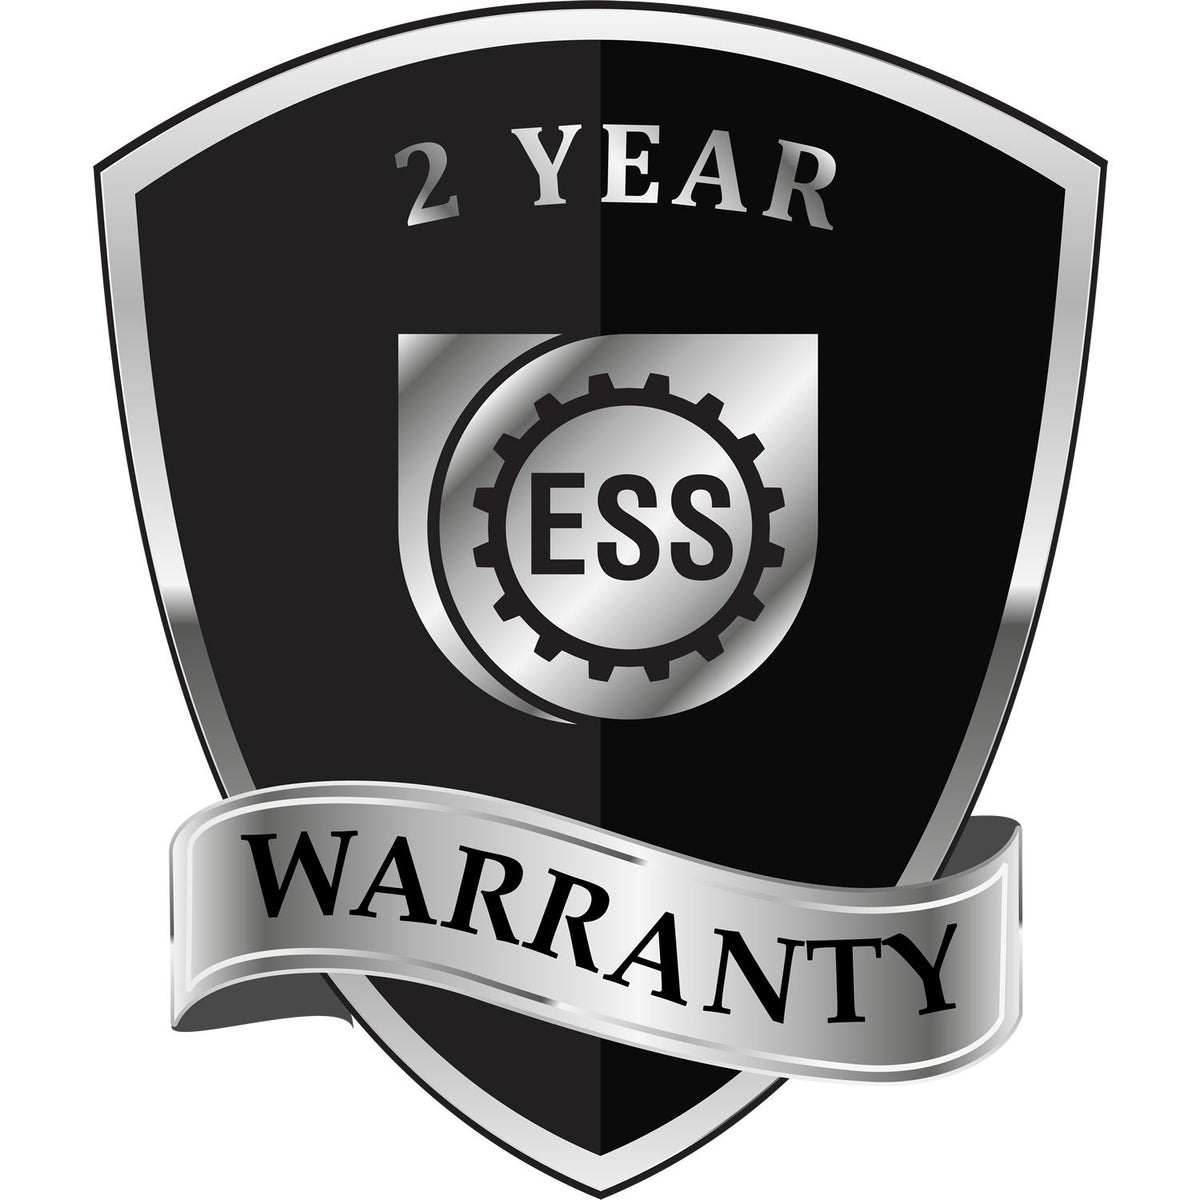 A black and silver badge or emblem showing warranty information for the Gift Oklahoma Geologist Seal